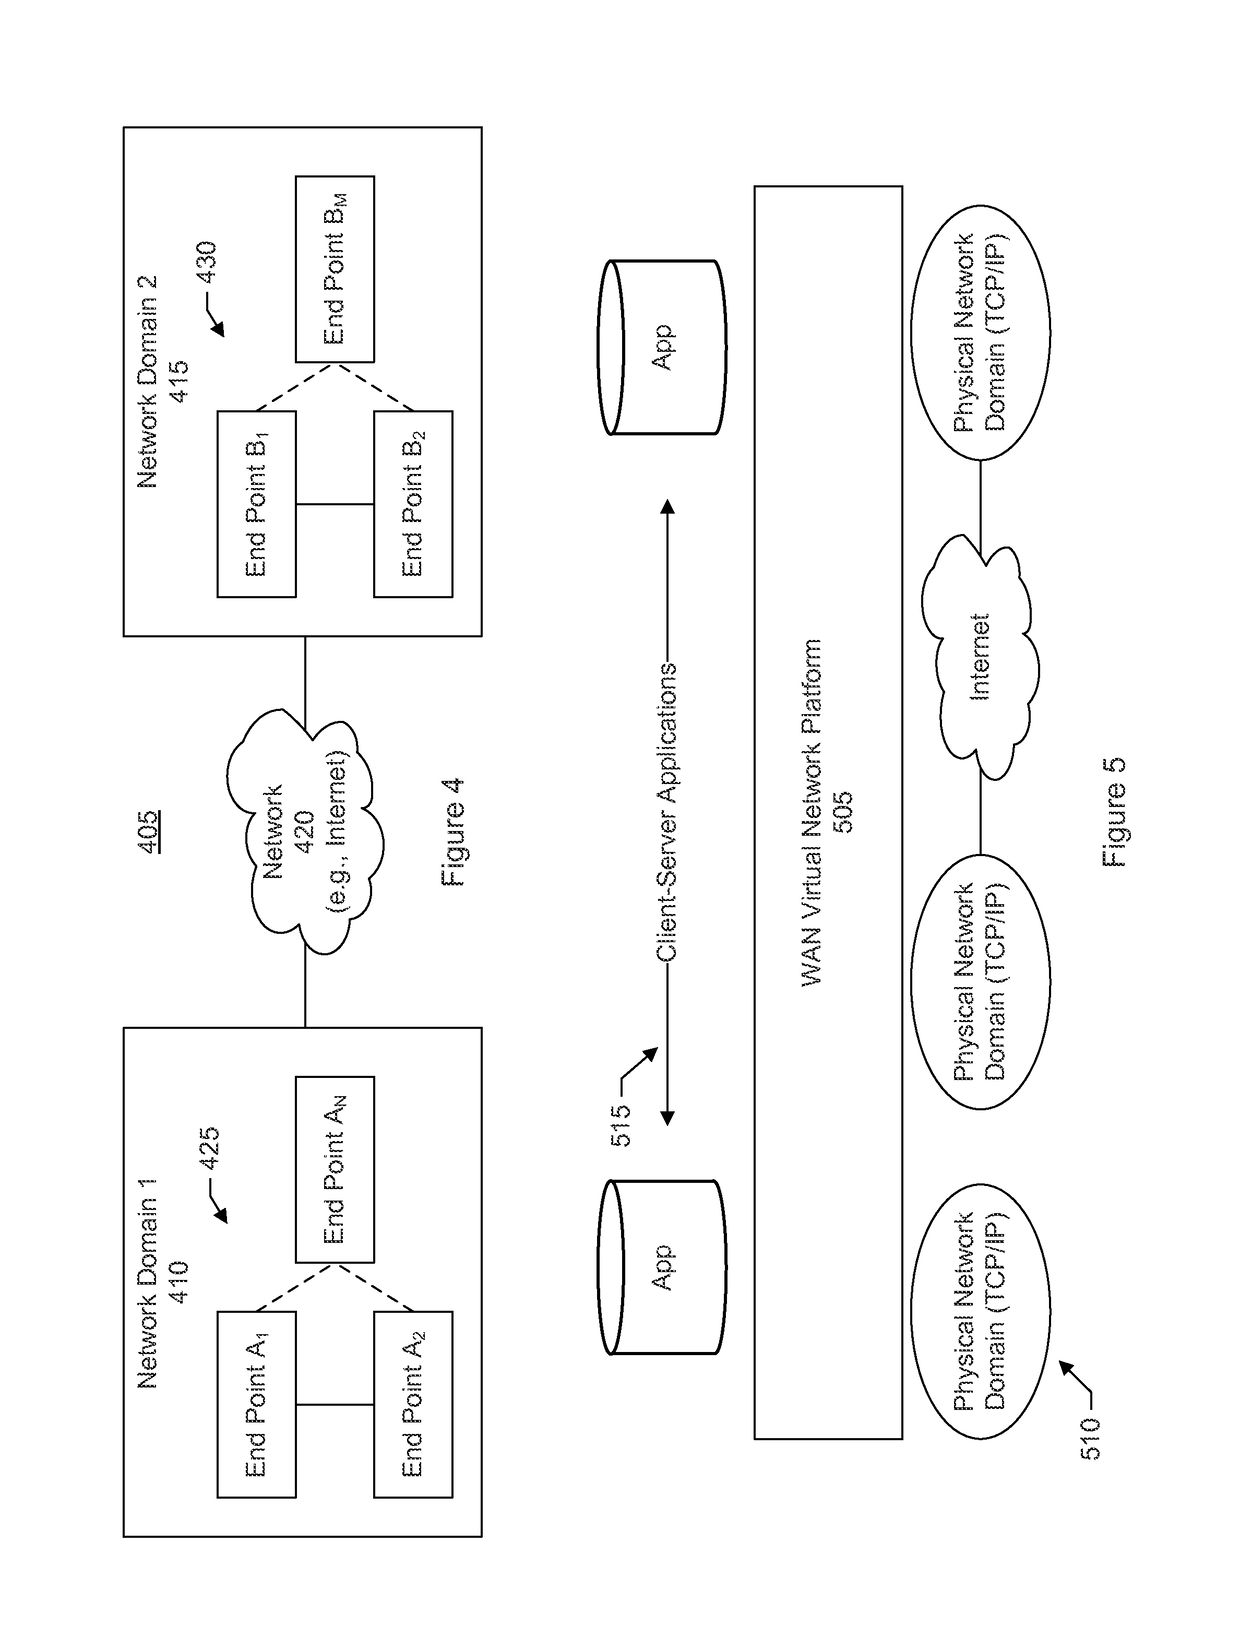 Secure cloud fabric to connect subnets in different network domains